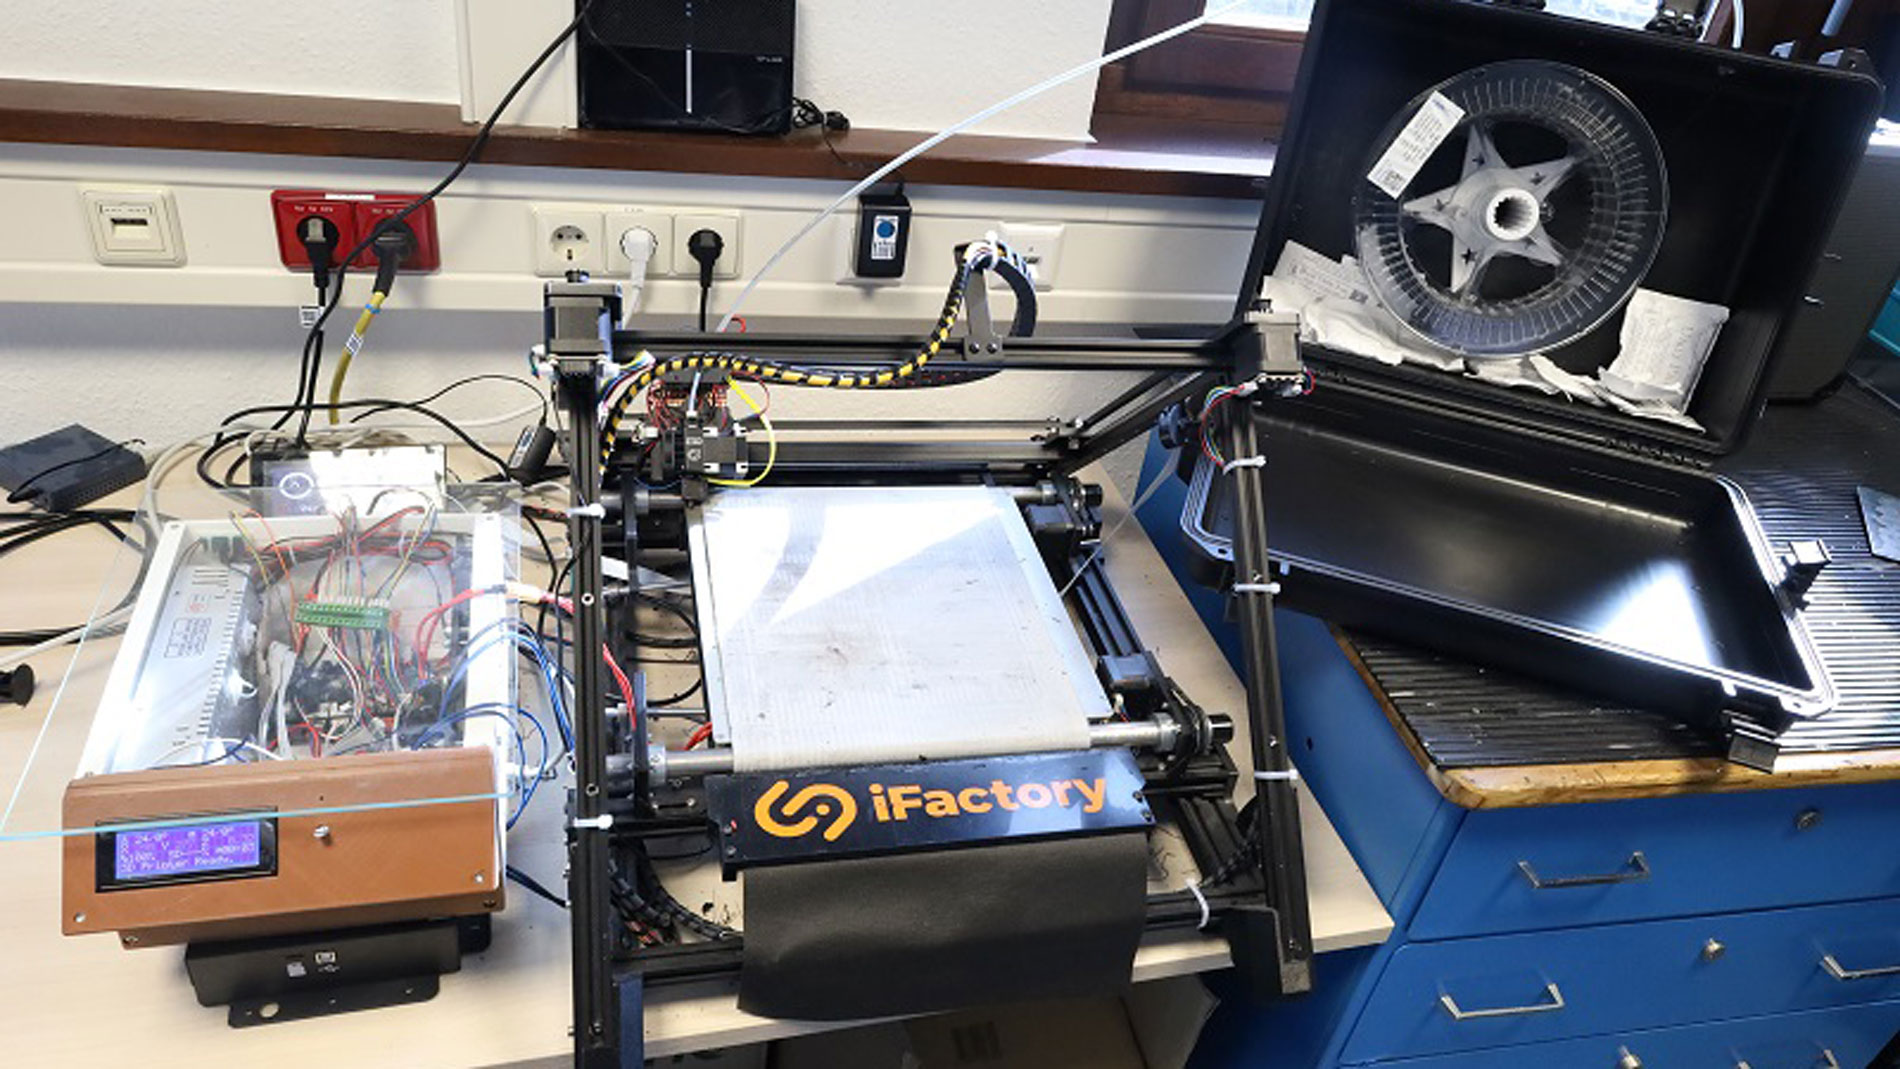 A lot of expertise has gone into modifying this iFactory belt printer. On the right, an air-tight case has been opened to access the filament inside. Image: Thomas Masuch